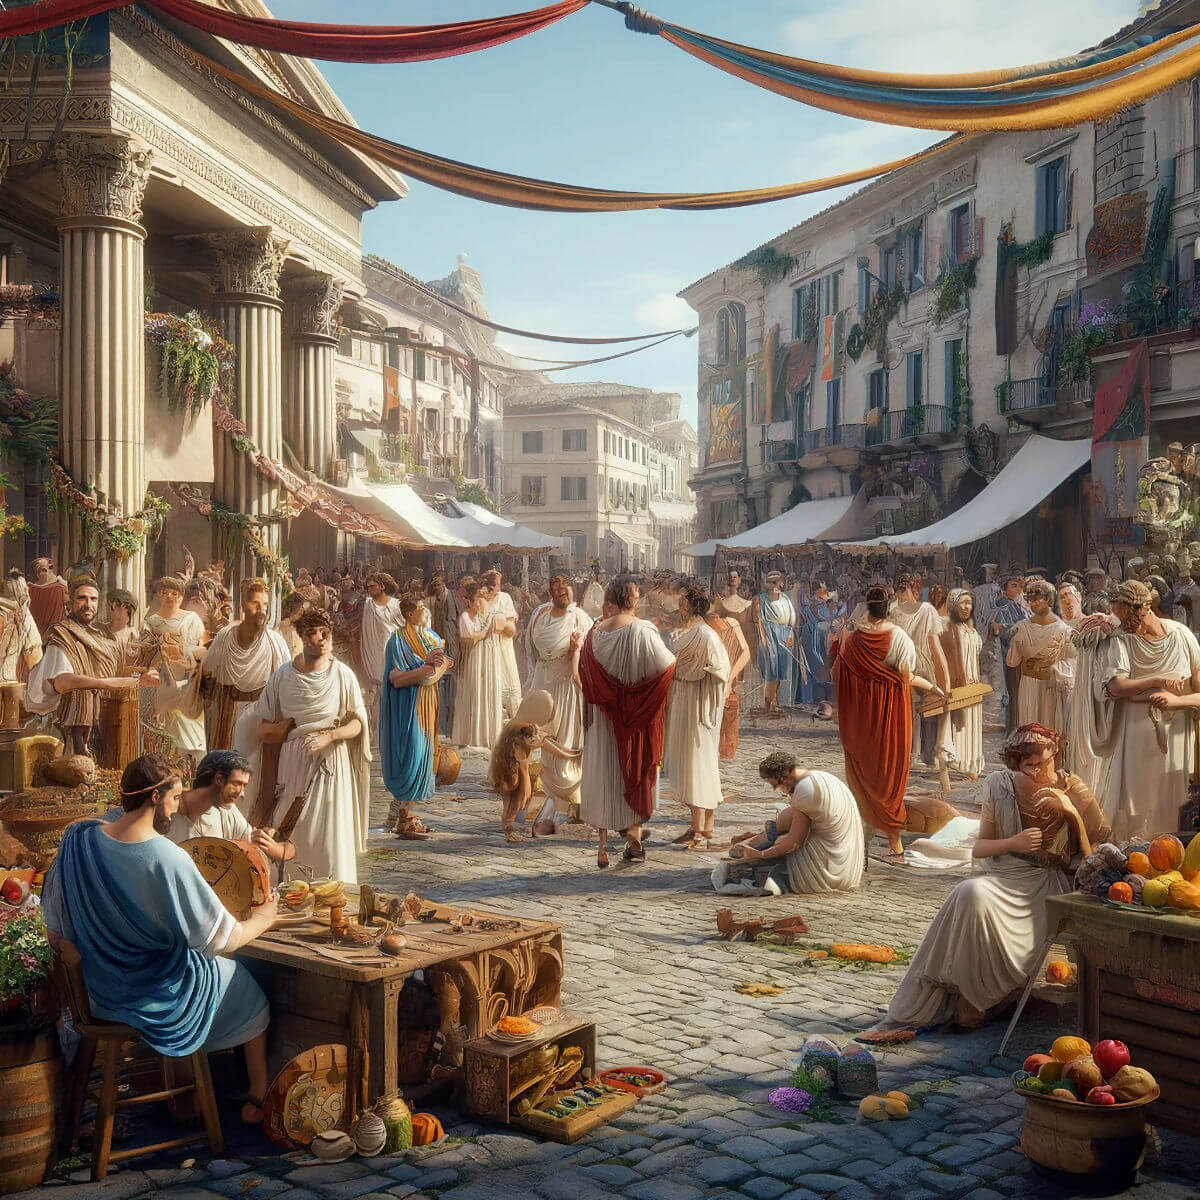 A brightly colored ancient Roman festival taking place